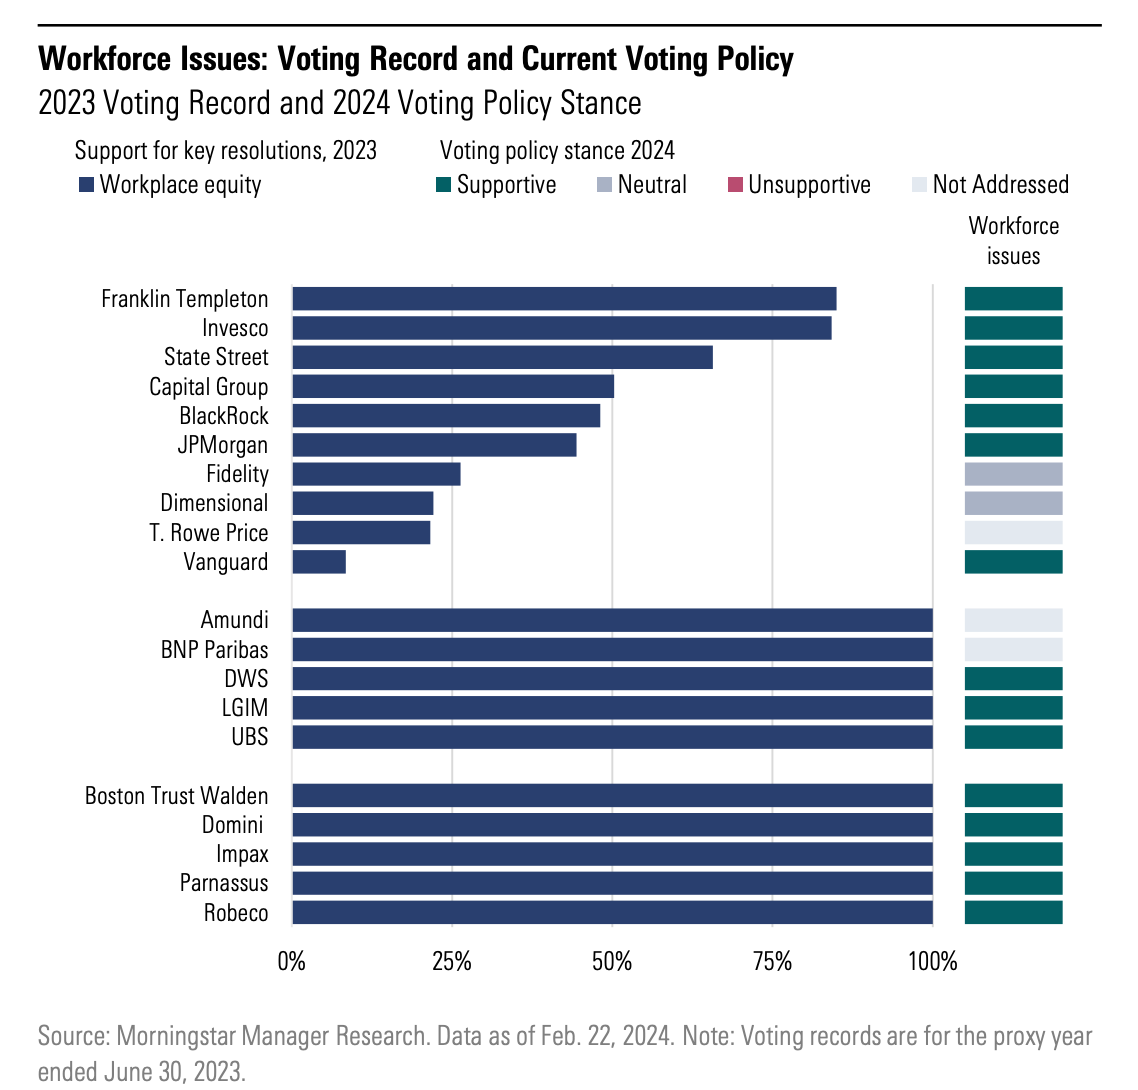 Bar graph showing the 2023 voting record on workplace equity and 2024 voting policy stance on workforce issues from large US managers, European managers, and sustainability-focused managers.